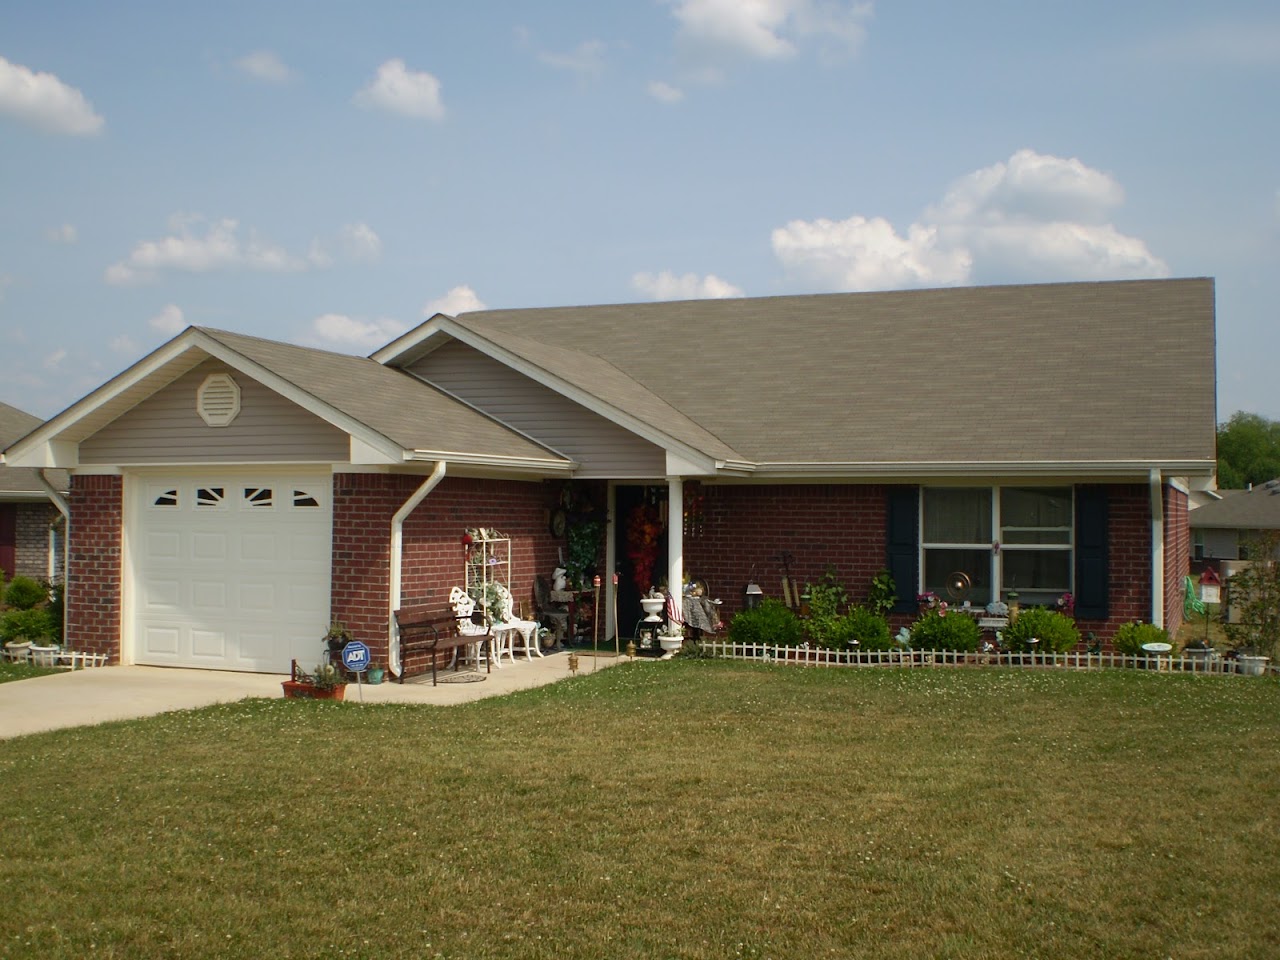 Photo of QUAIL RUN ESTATES. Affordable housing located at 198 FALCON DR MCMINNVILLE, TN 37110